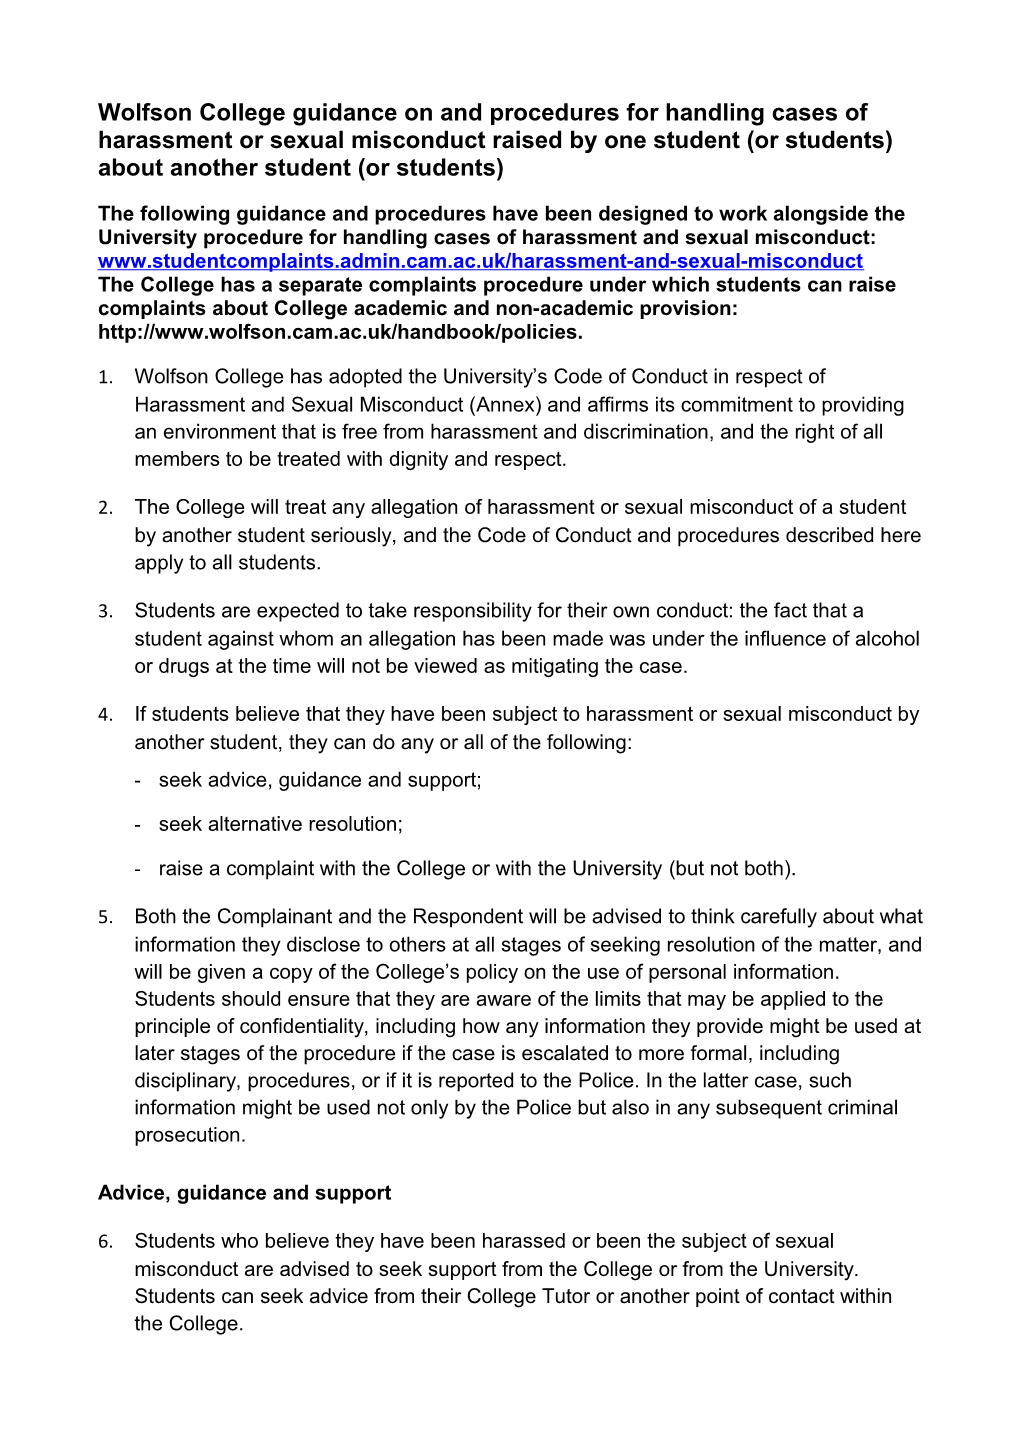 Wolfson College Guidance on and Procedures for Handling Cases of Harassment Or Sexual